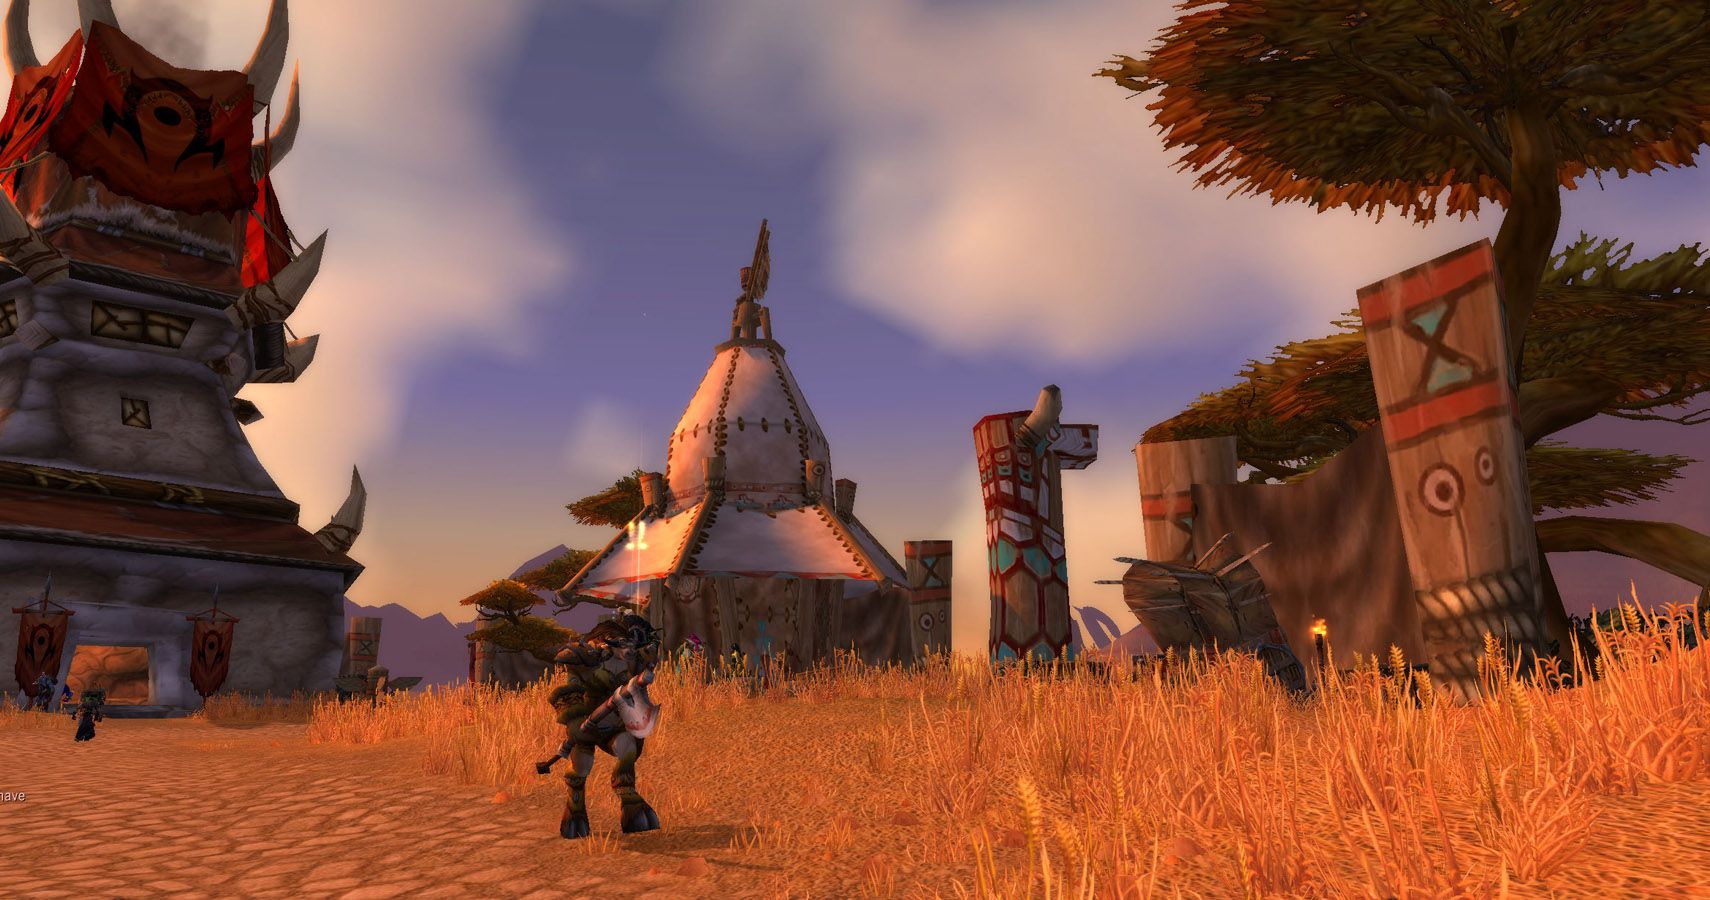 World of Warcraft: Classic preview